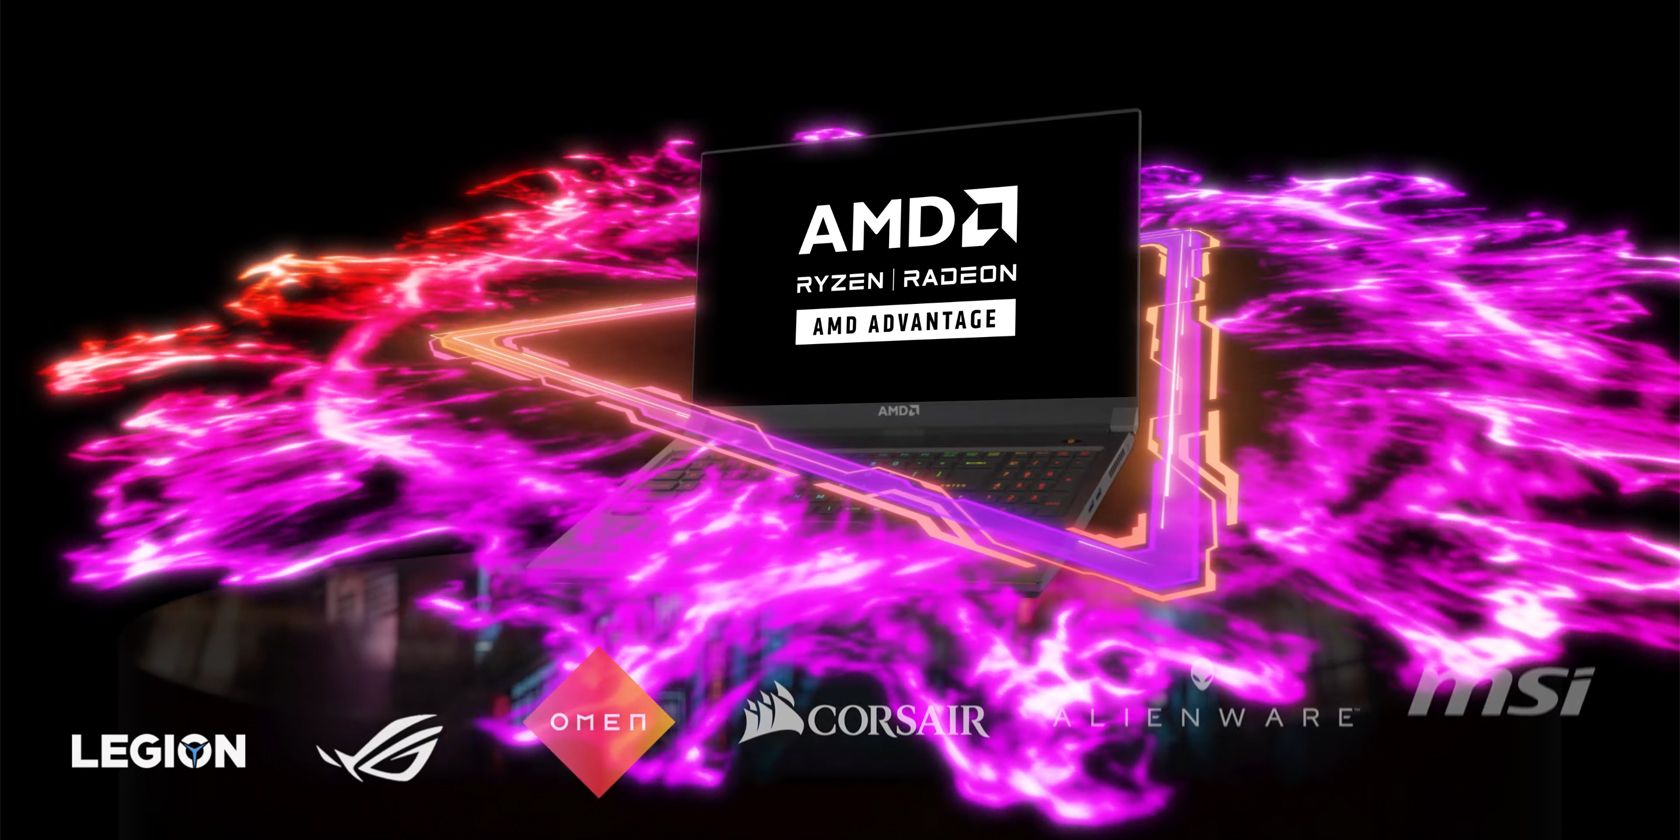 AMD Advantage hero image with participating manufacturers logos